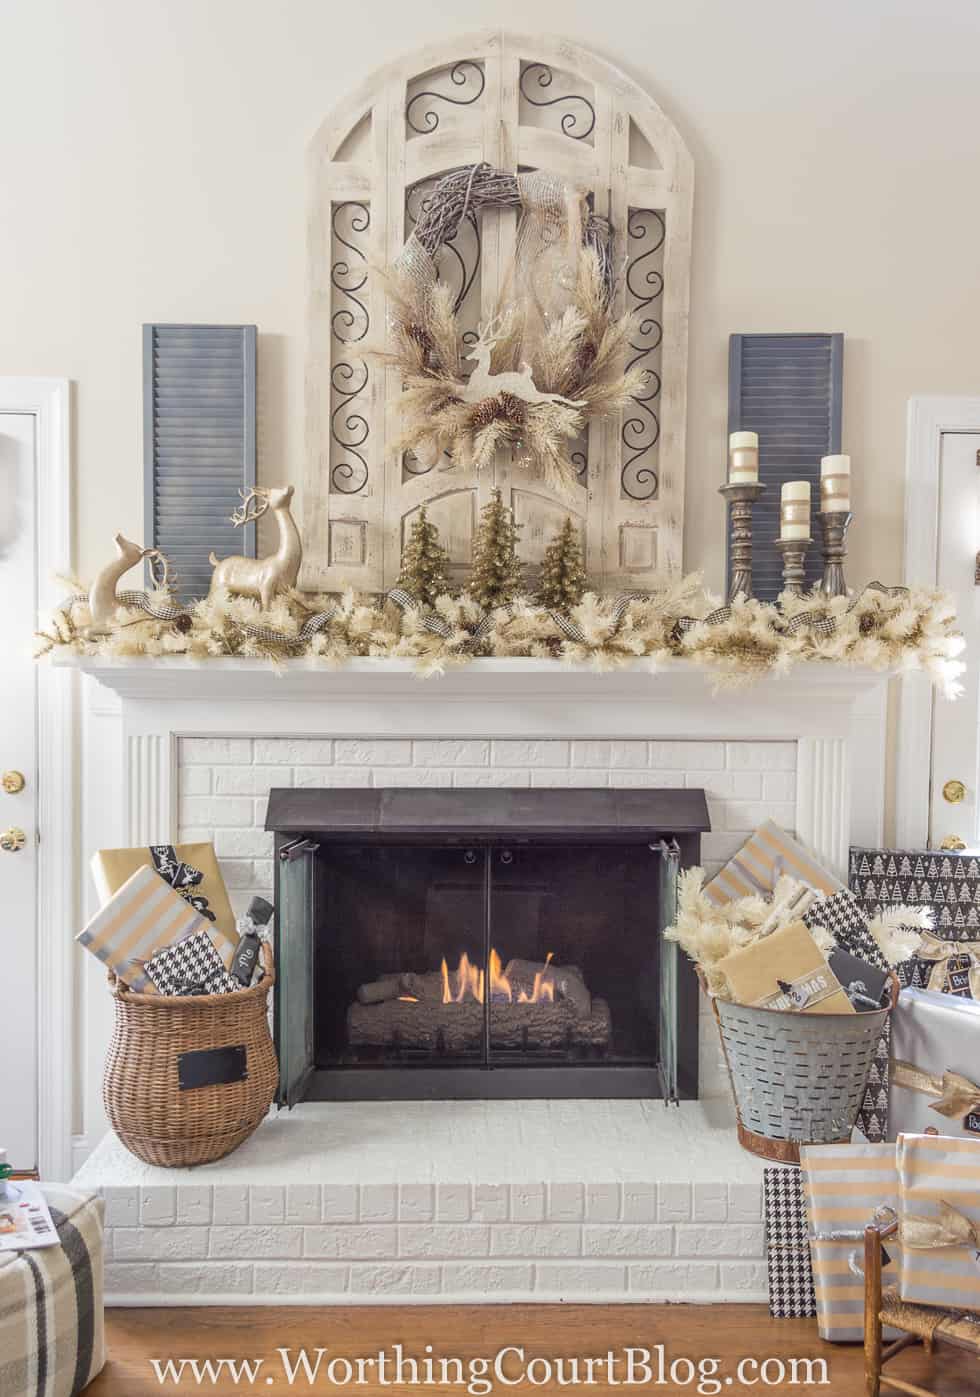 A white fireplace with baskets flanking the sides of it and a mantel decorated for Christmas.